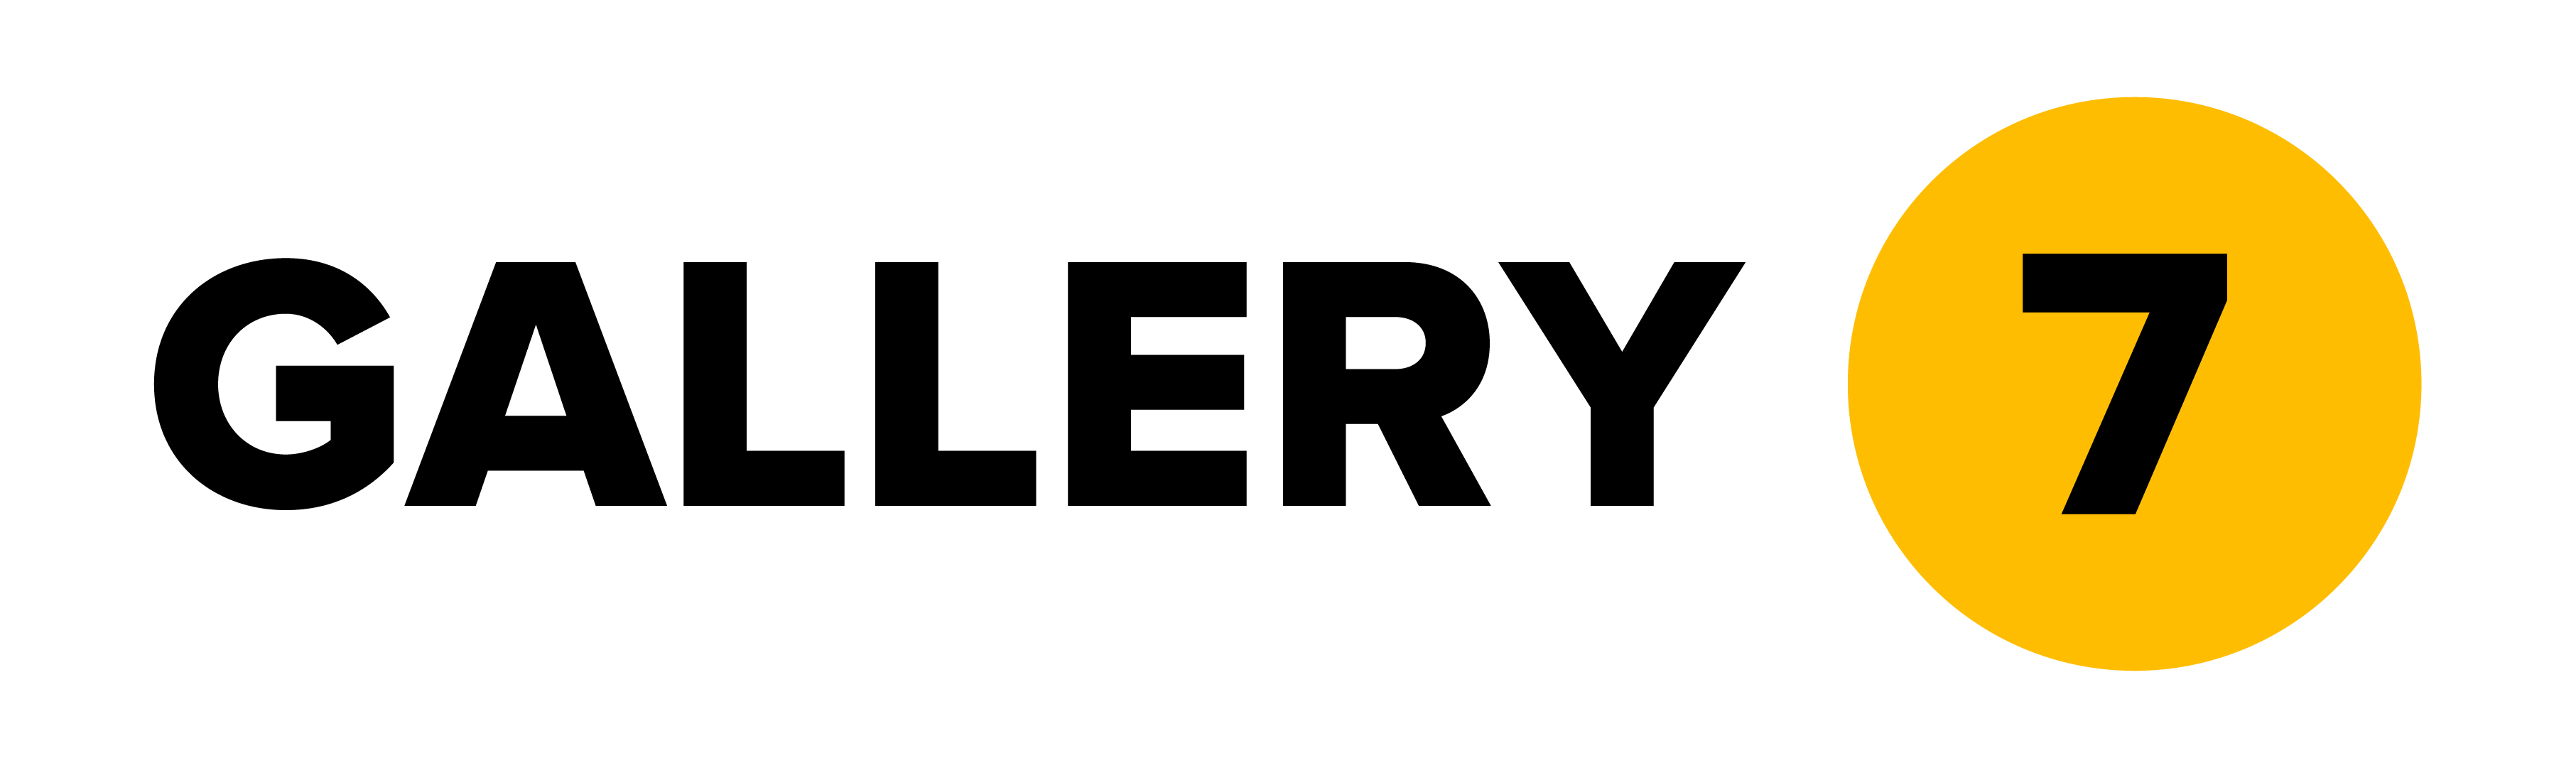 Gallery 7 Art Prize 2018